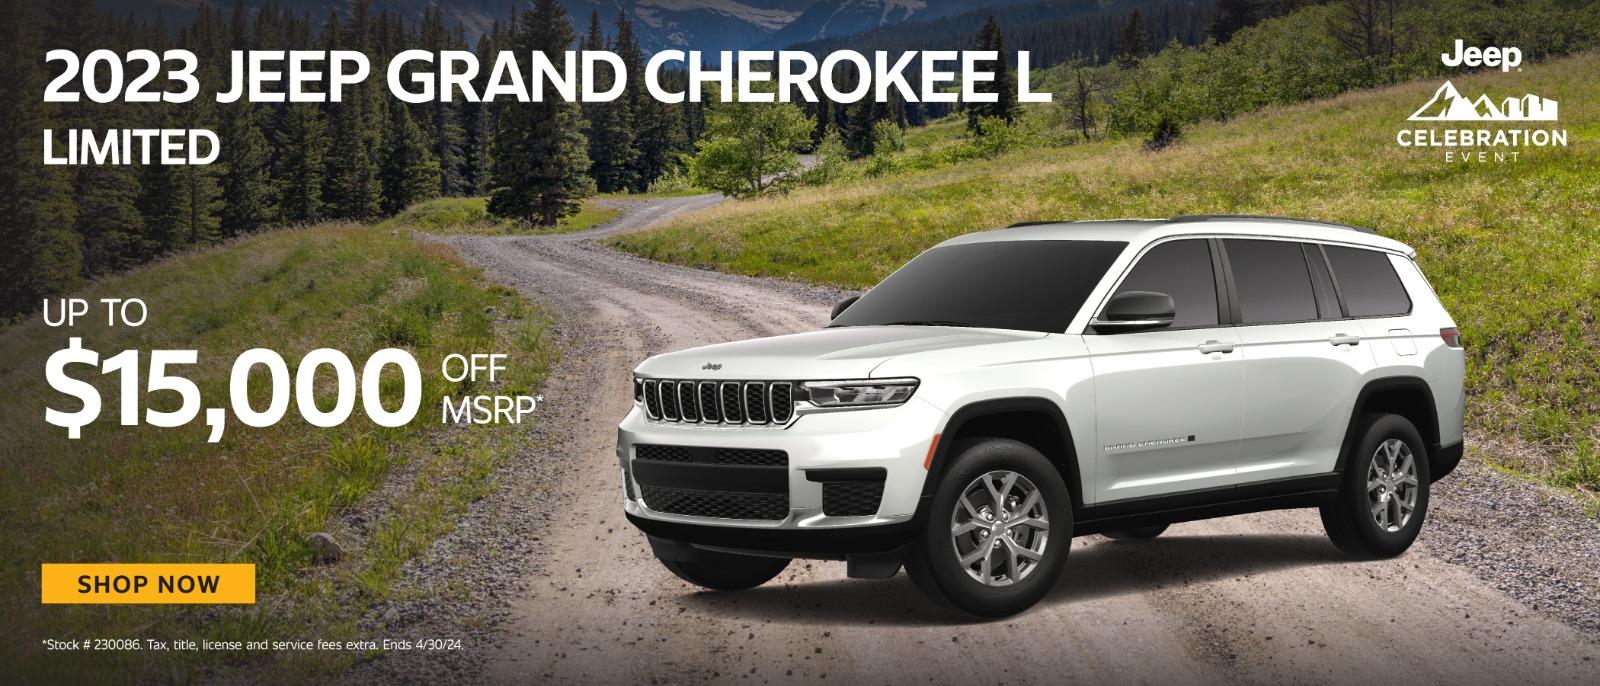 2023 Jeep Grand Cherokee up to $15,000 off MSRP